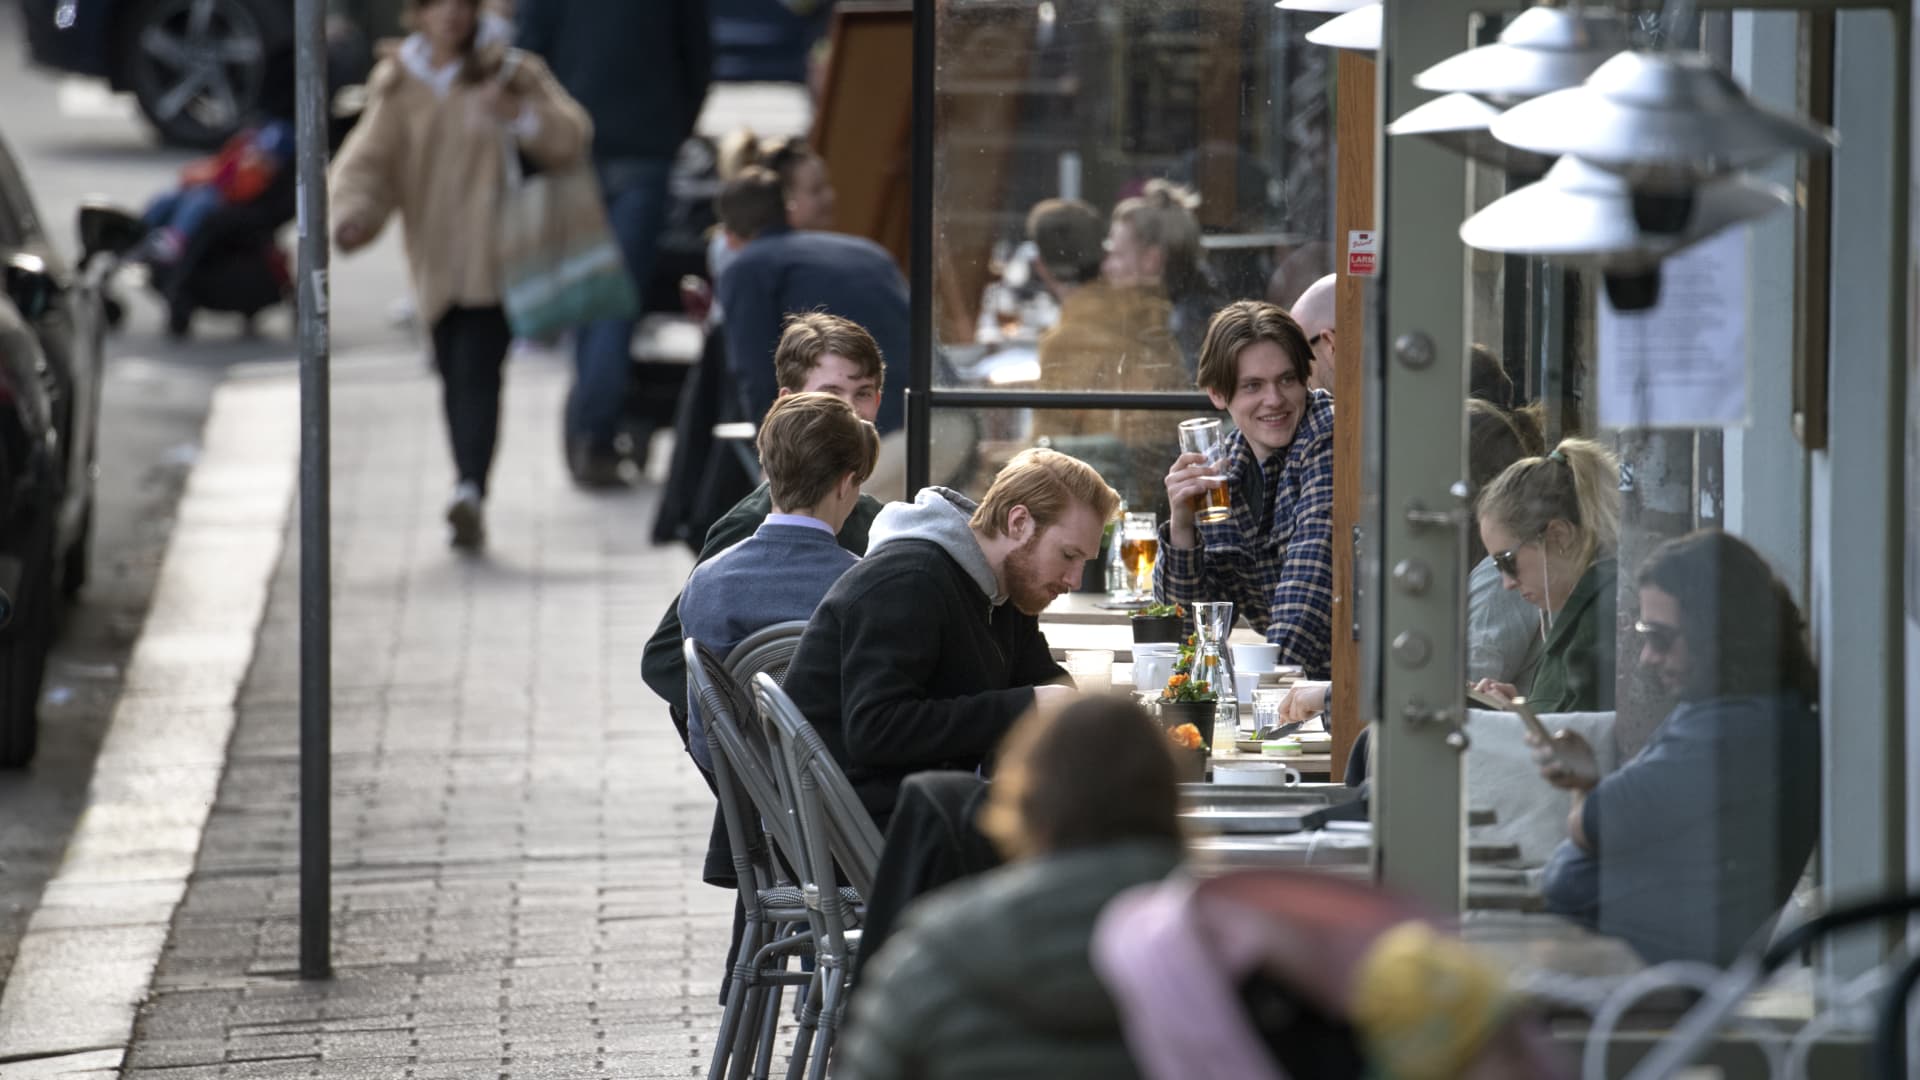 People enjoy themselves at an outdoor restaruant, amid the coronavirus disease (COVID-19) outbreak, in central Stockholm, Sweden, on April 20, 2020.